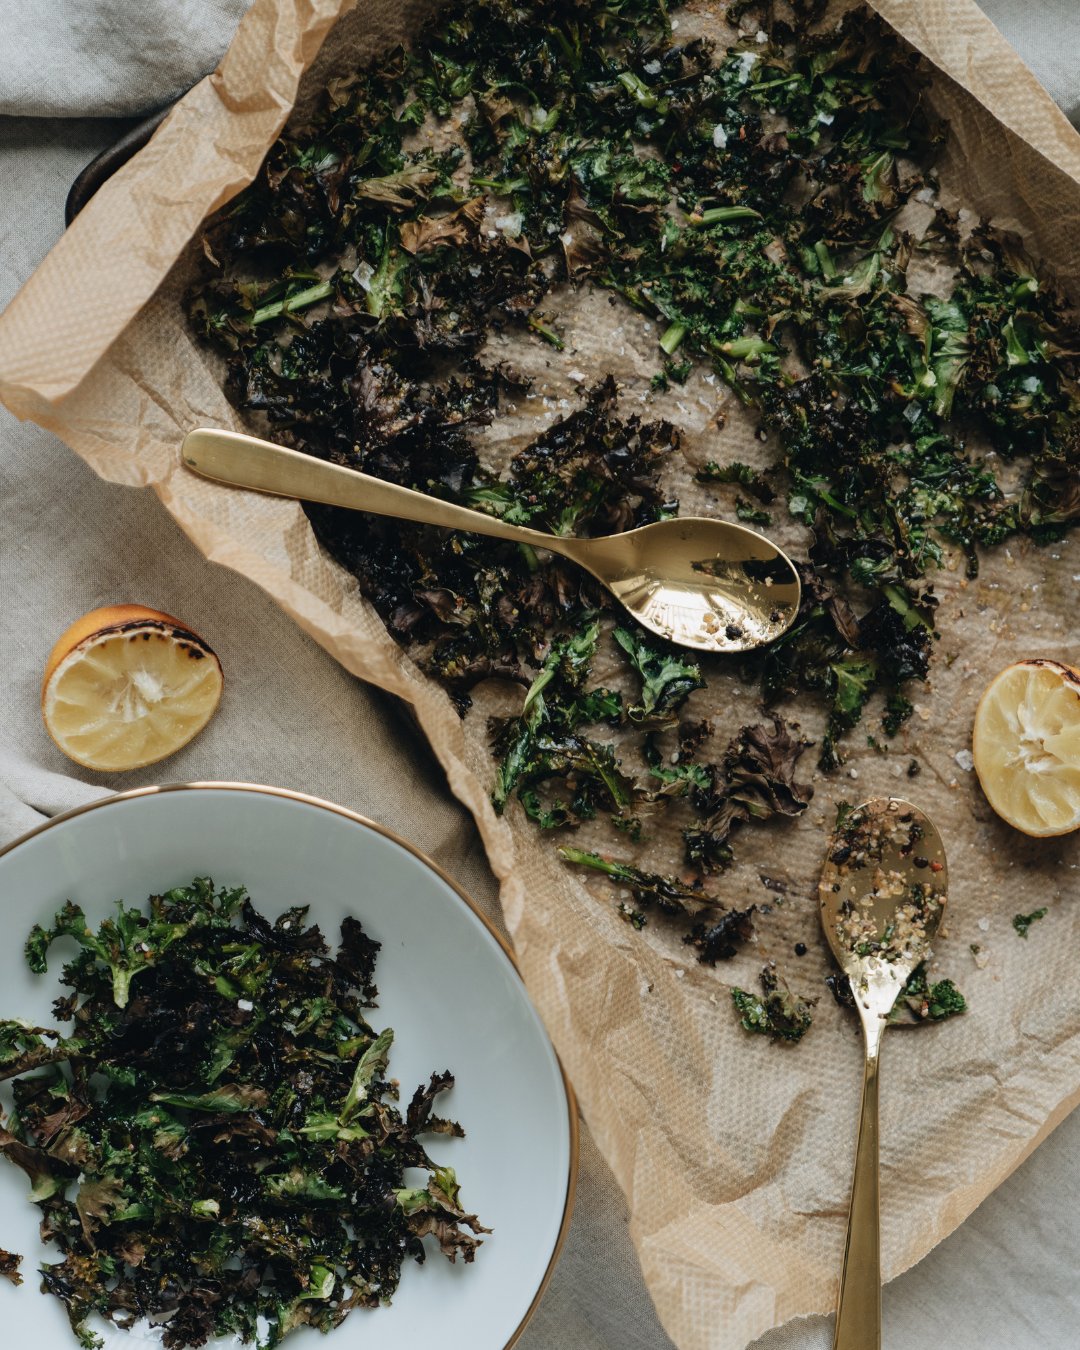 Crispy Kale Chips Recipe - Make Your Own at Home! kale+chips+recipe+ +ready+to+eat